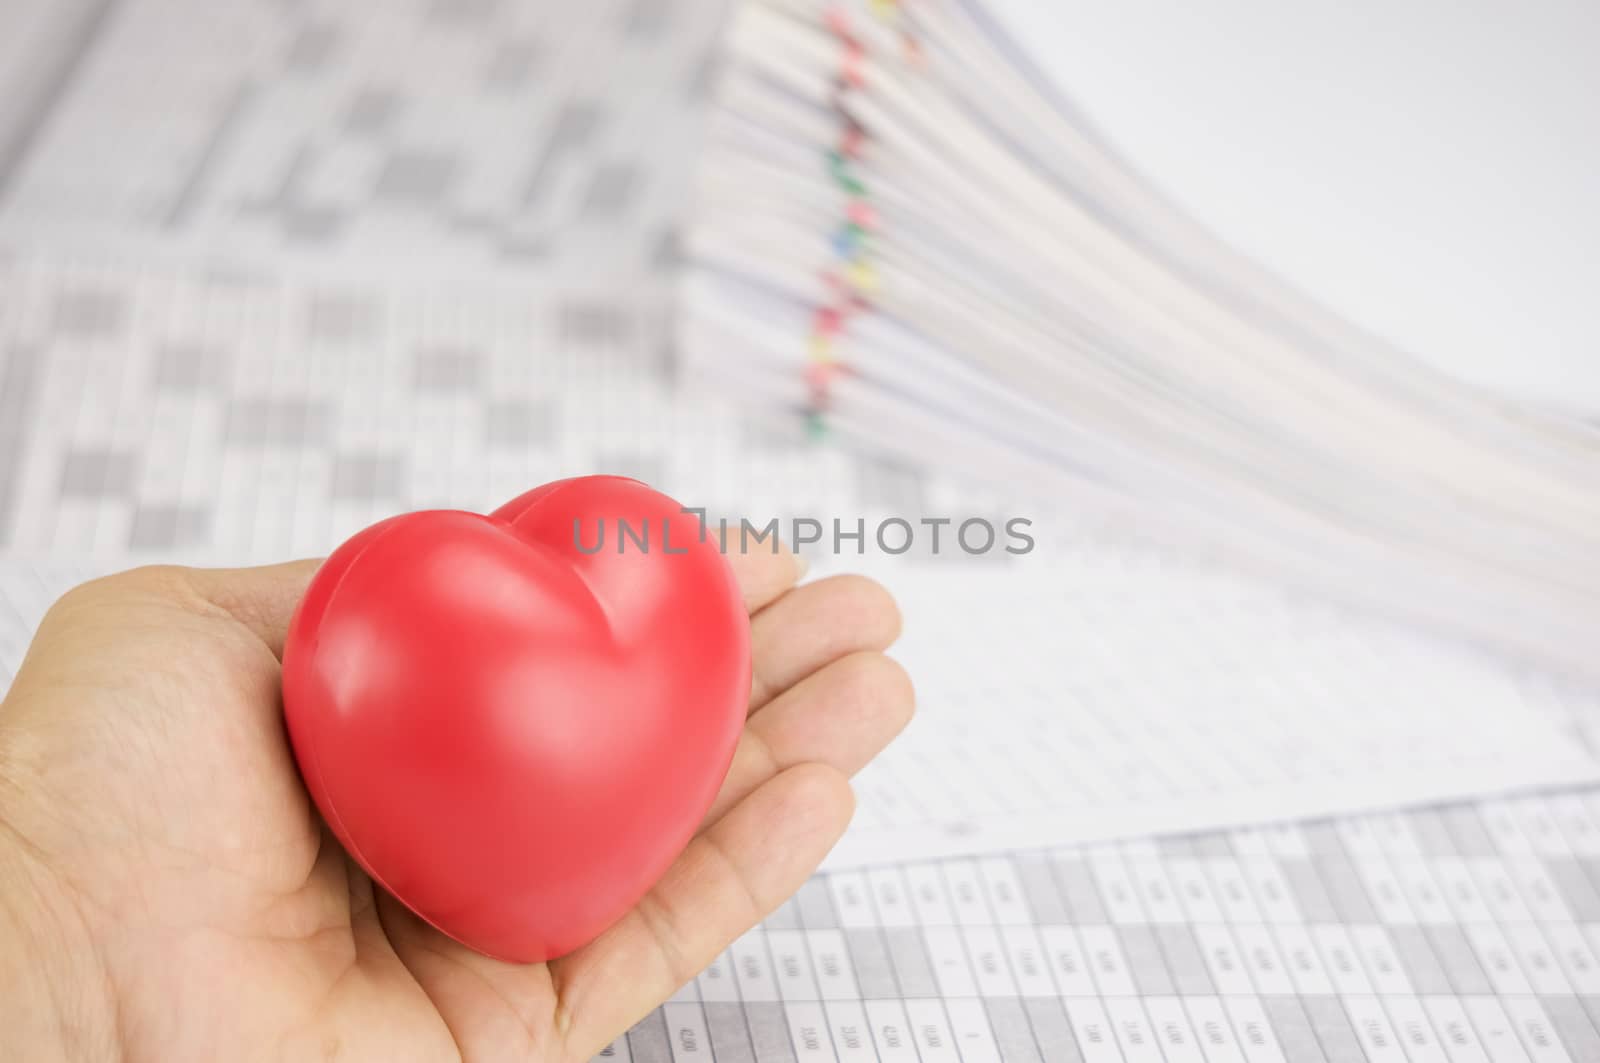 Red heart in hand have blur pile paperwork as background by eaglesky